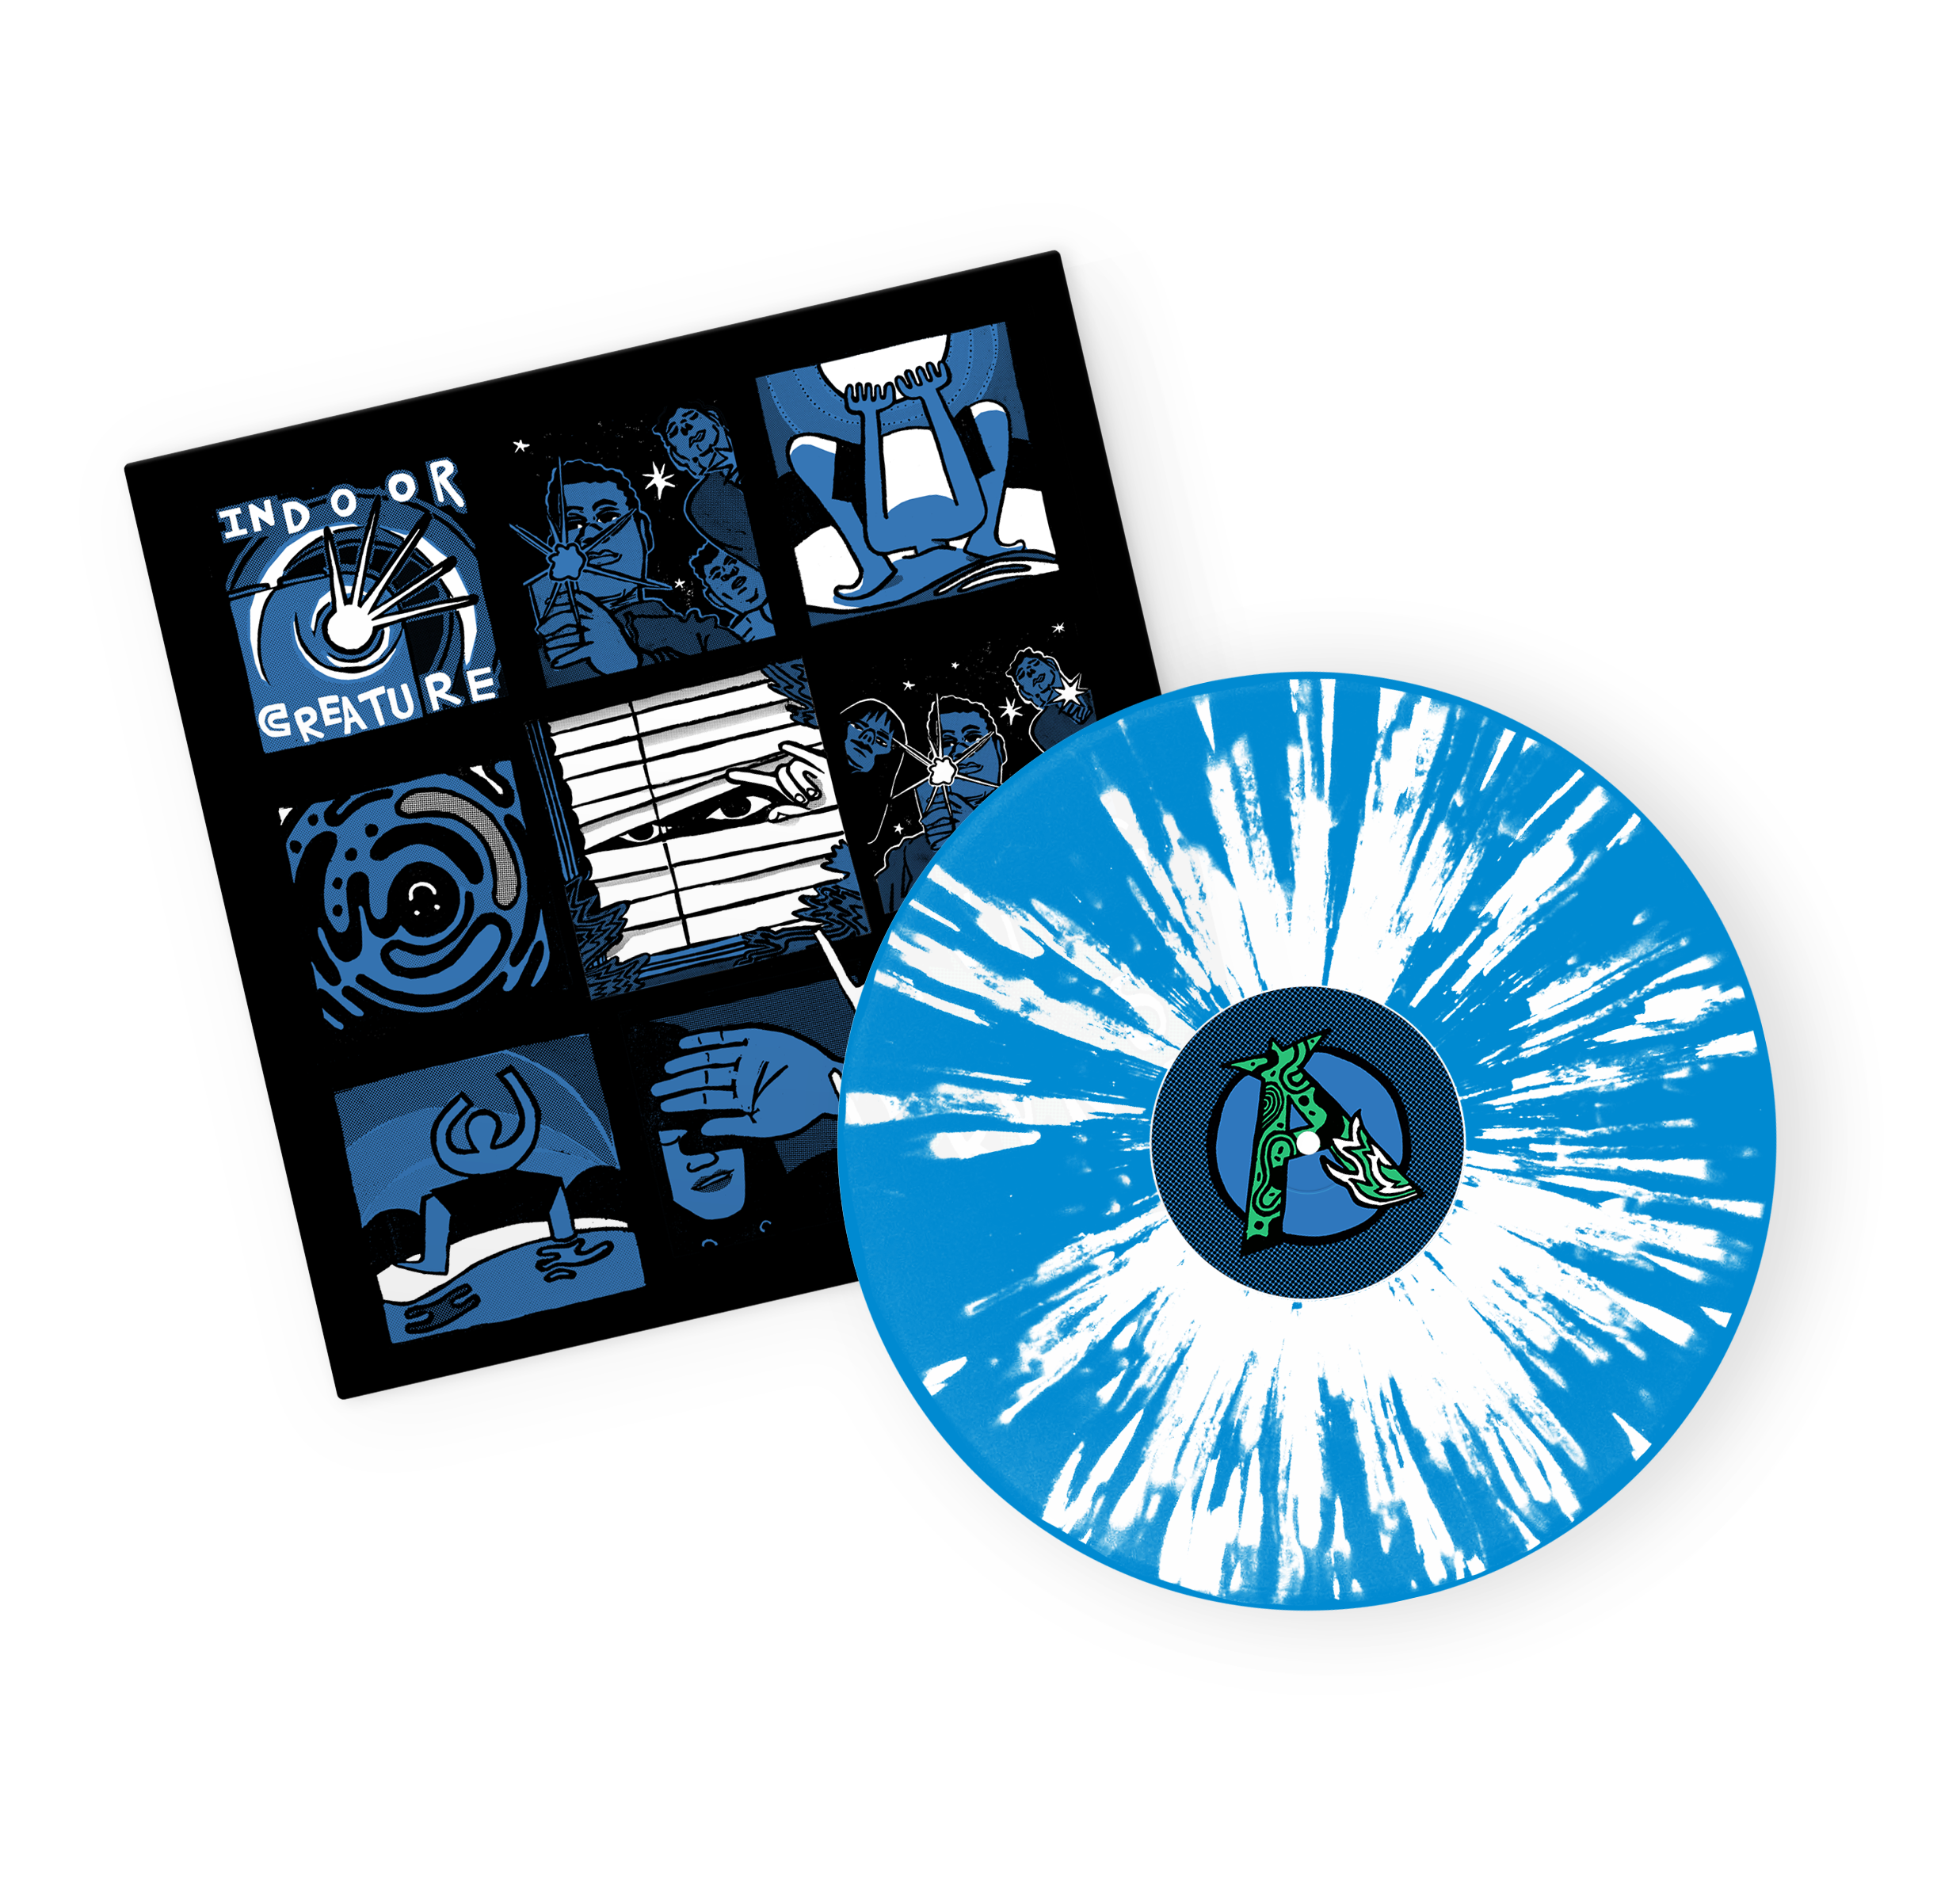 Other-Record-Labels---Vinyl-Record-Mockup-1.png